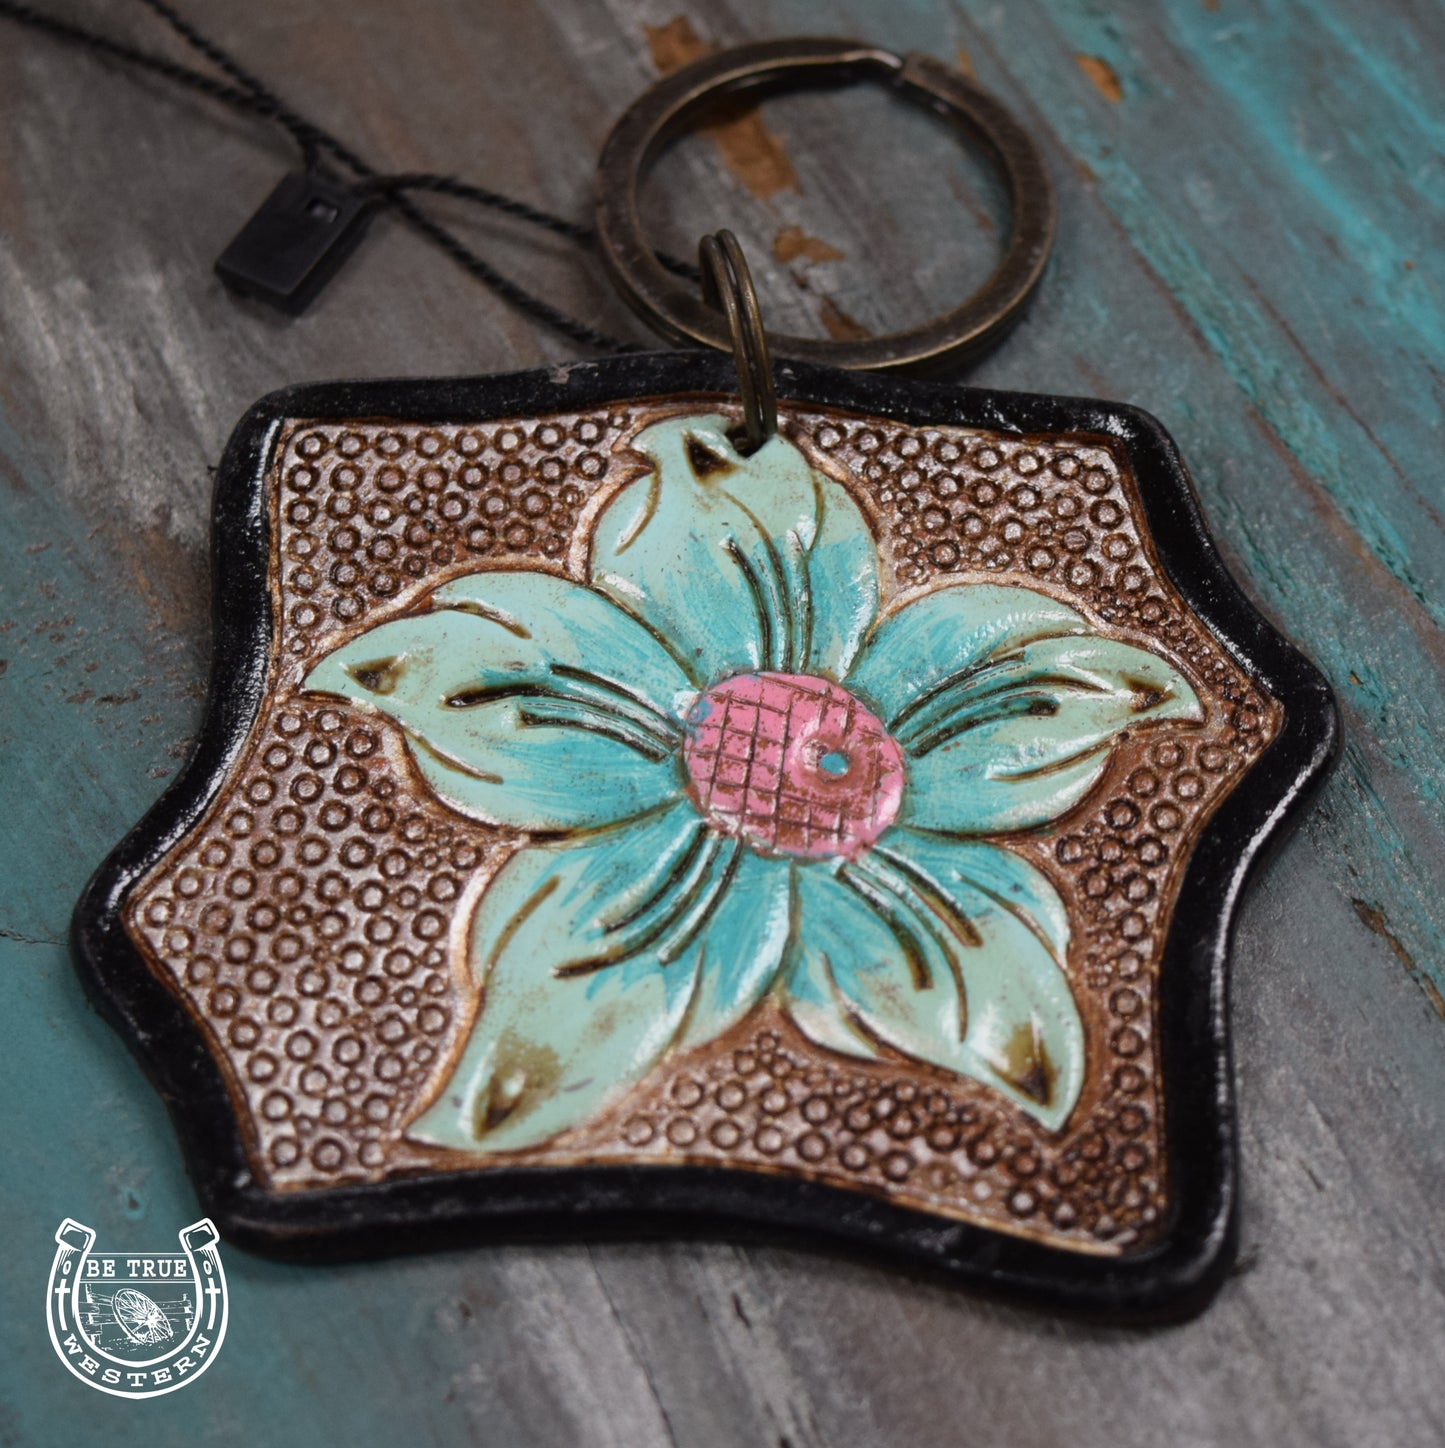 The Leather Flower Key Chain